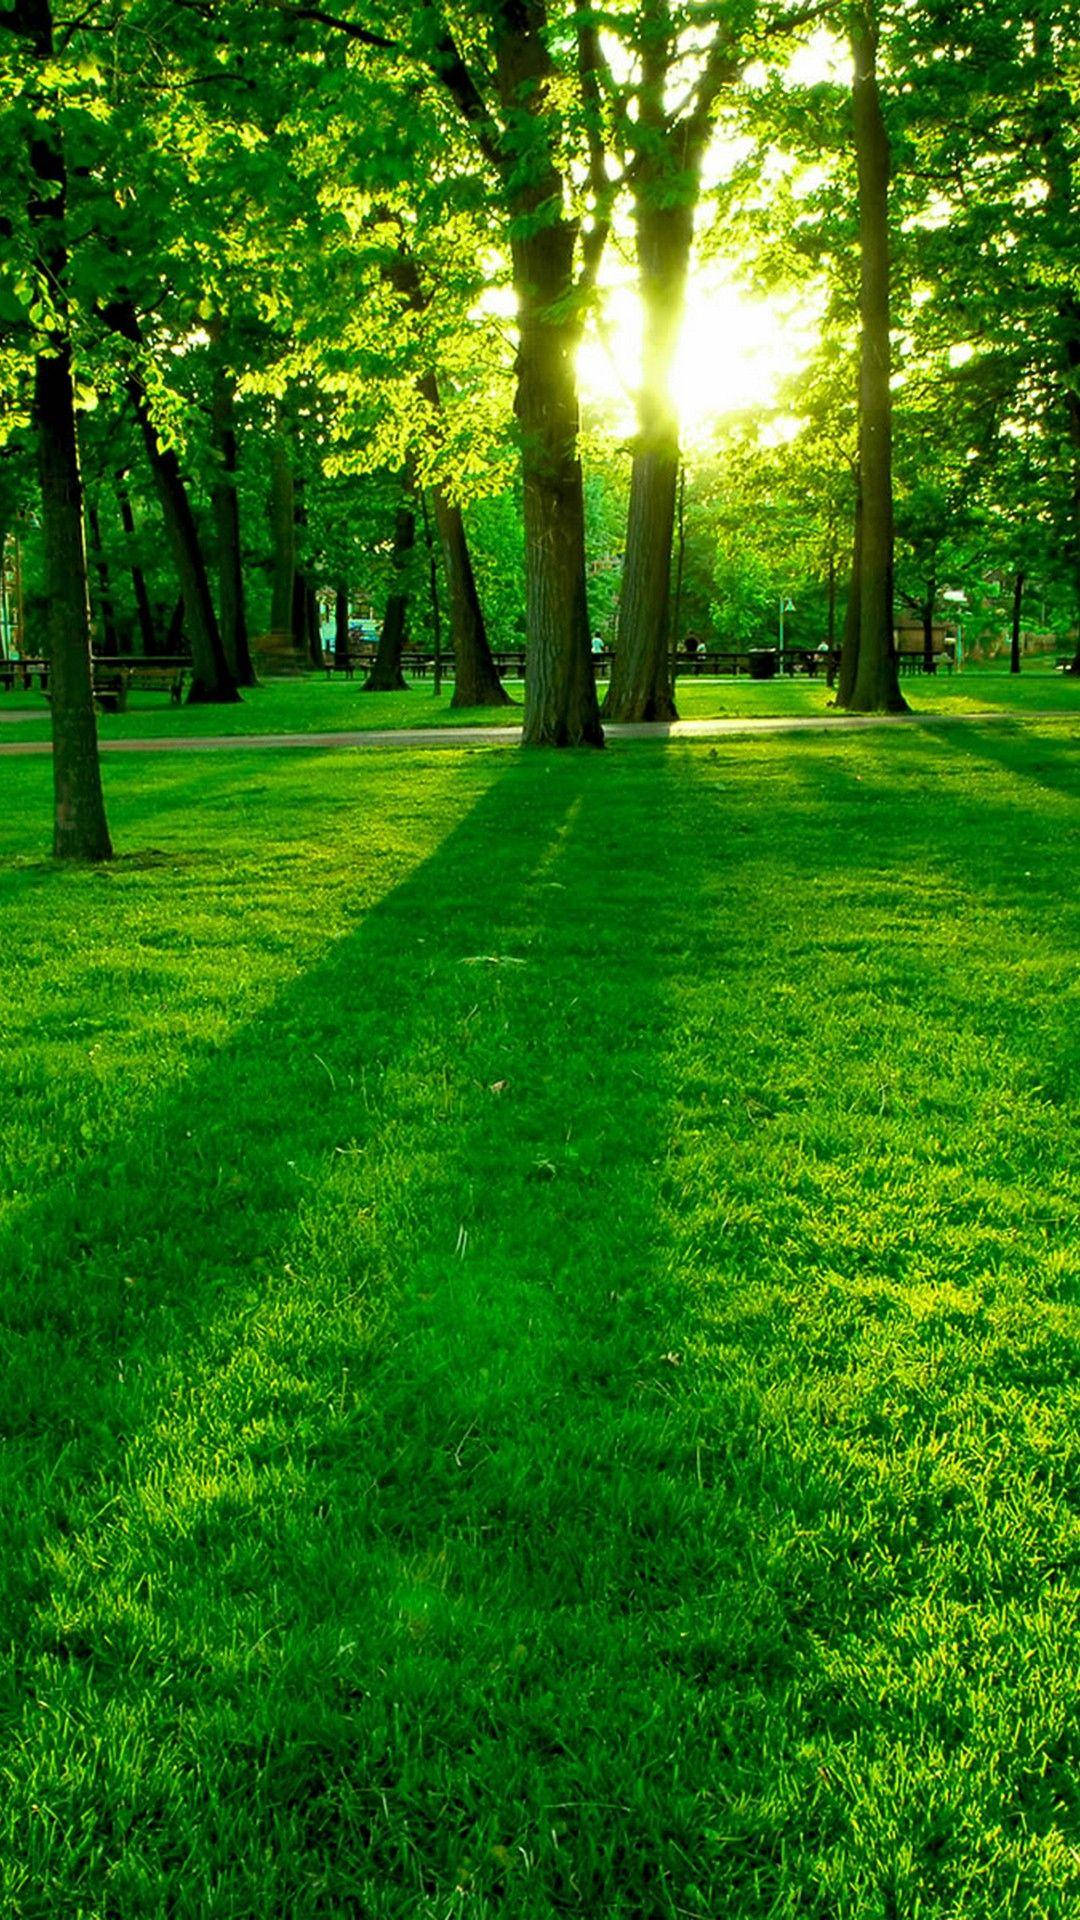 Green Grass And Trees Nature Theme